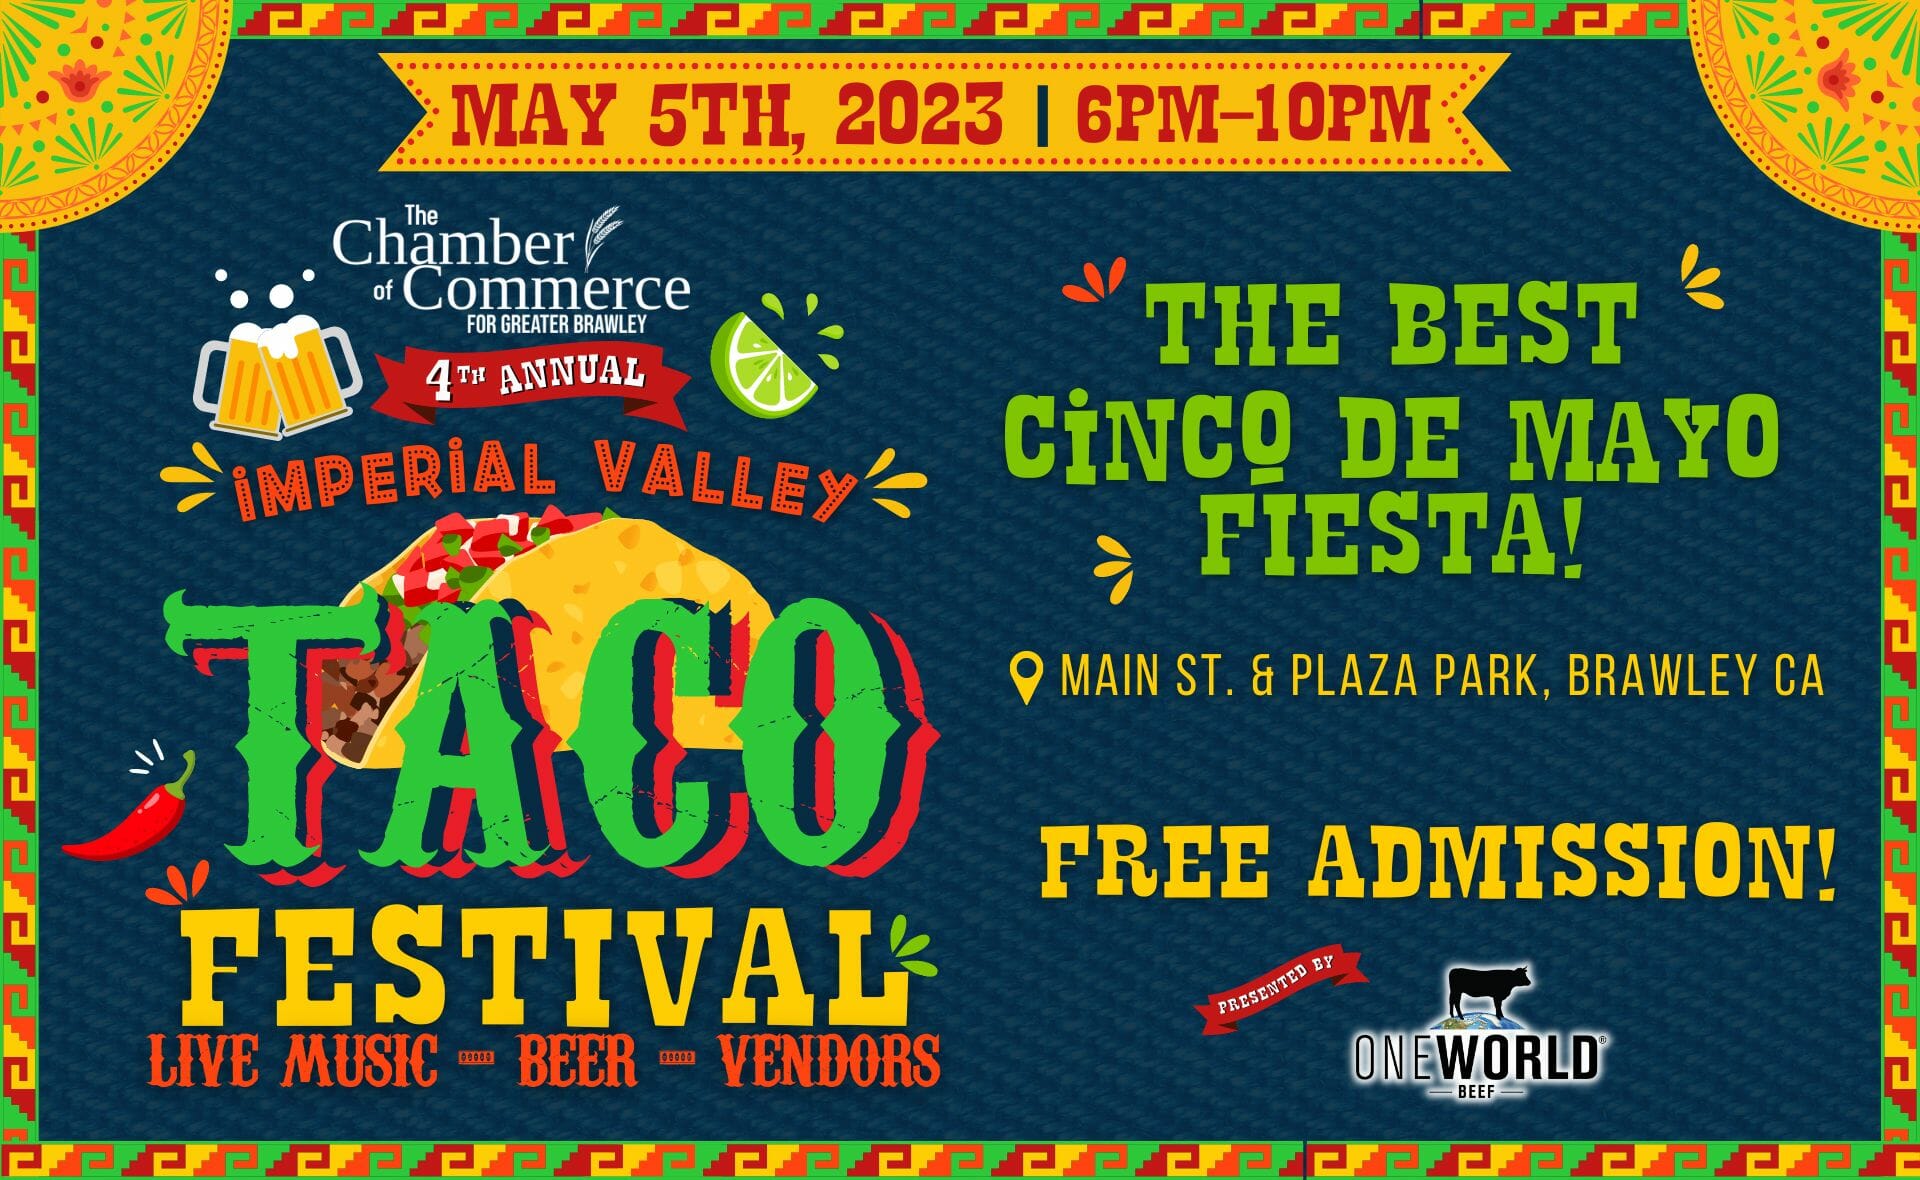 Imperial Valley Taco Festival Brawley Chamber of Commerce